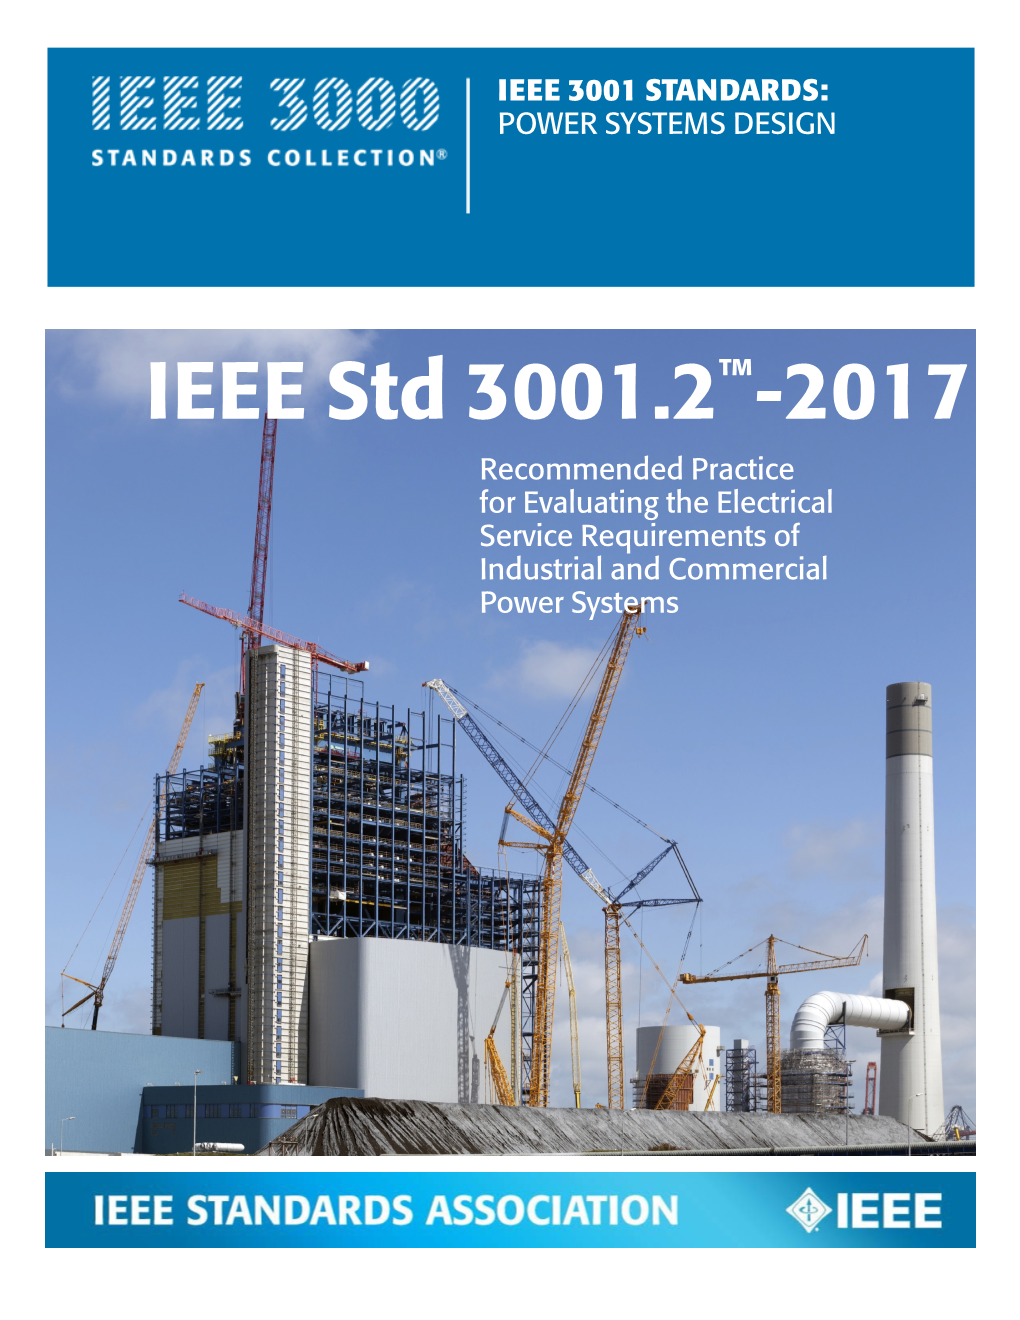 IEEE Std 3001.2™-2017 Recommended Practice for Evaluating the Electrical Service Requirements of Industrial and Commercial Power Systems IEEE Std 3001.2™-2017